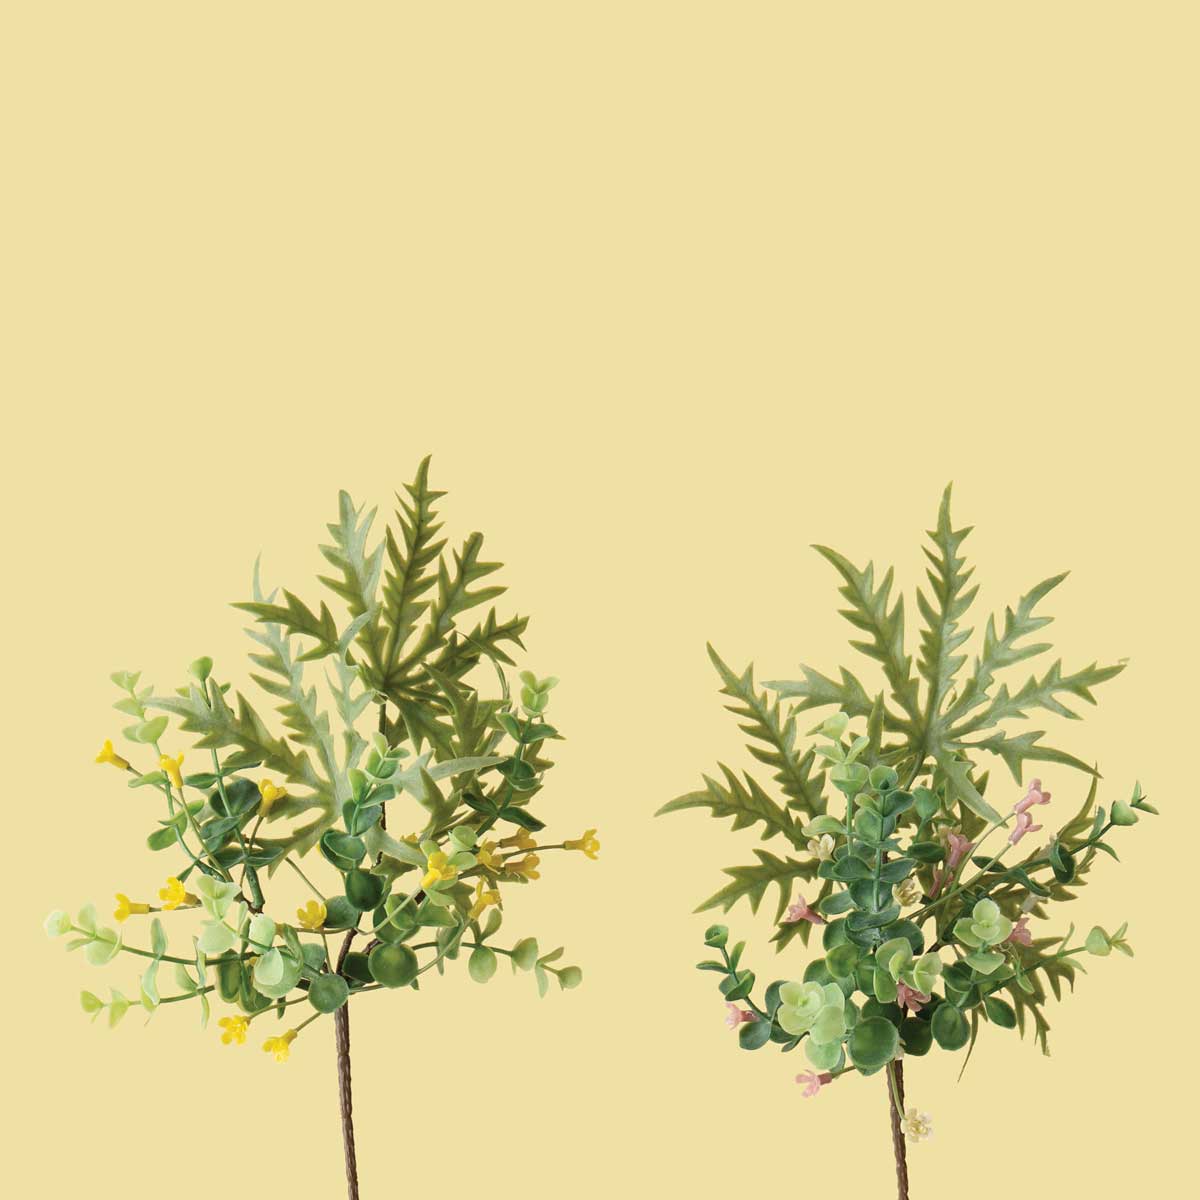 b50 PIK FOLIAGE/FLORAL YELLOW 7IN X 13IN - Click Image to Close